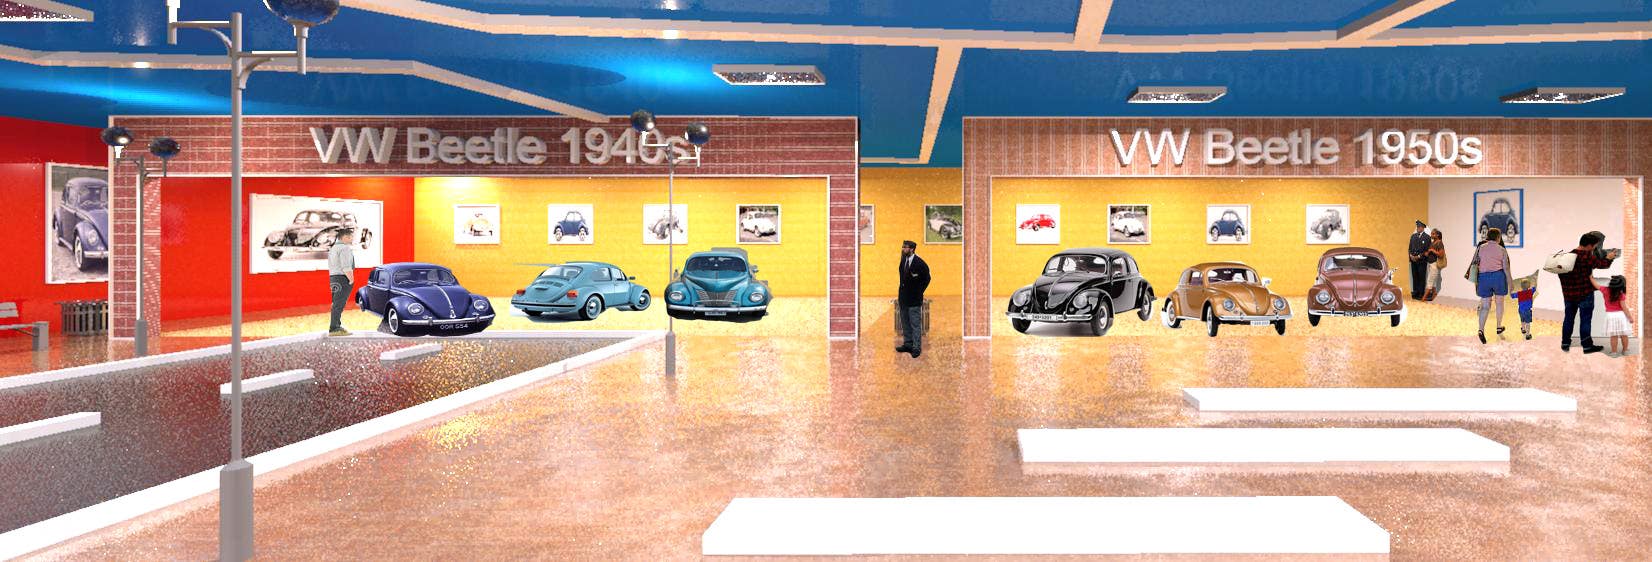 
                                                                                                            Penyertaan Peraduan #                                        53
                                     untuk                                         Illustrate an interior with visitors and attractions for a modern VW Beetle museum
                                    